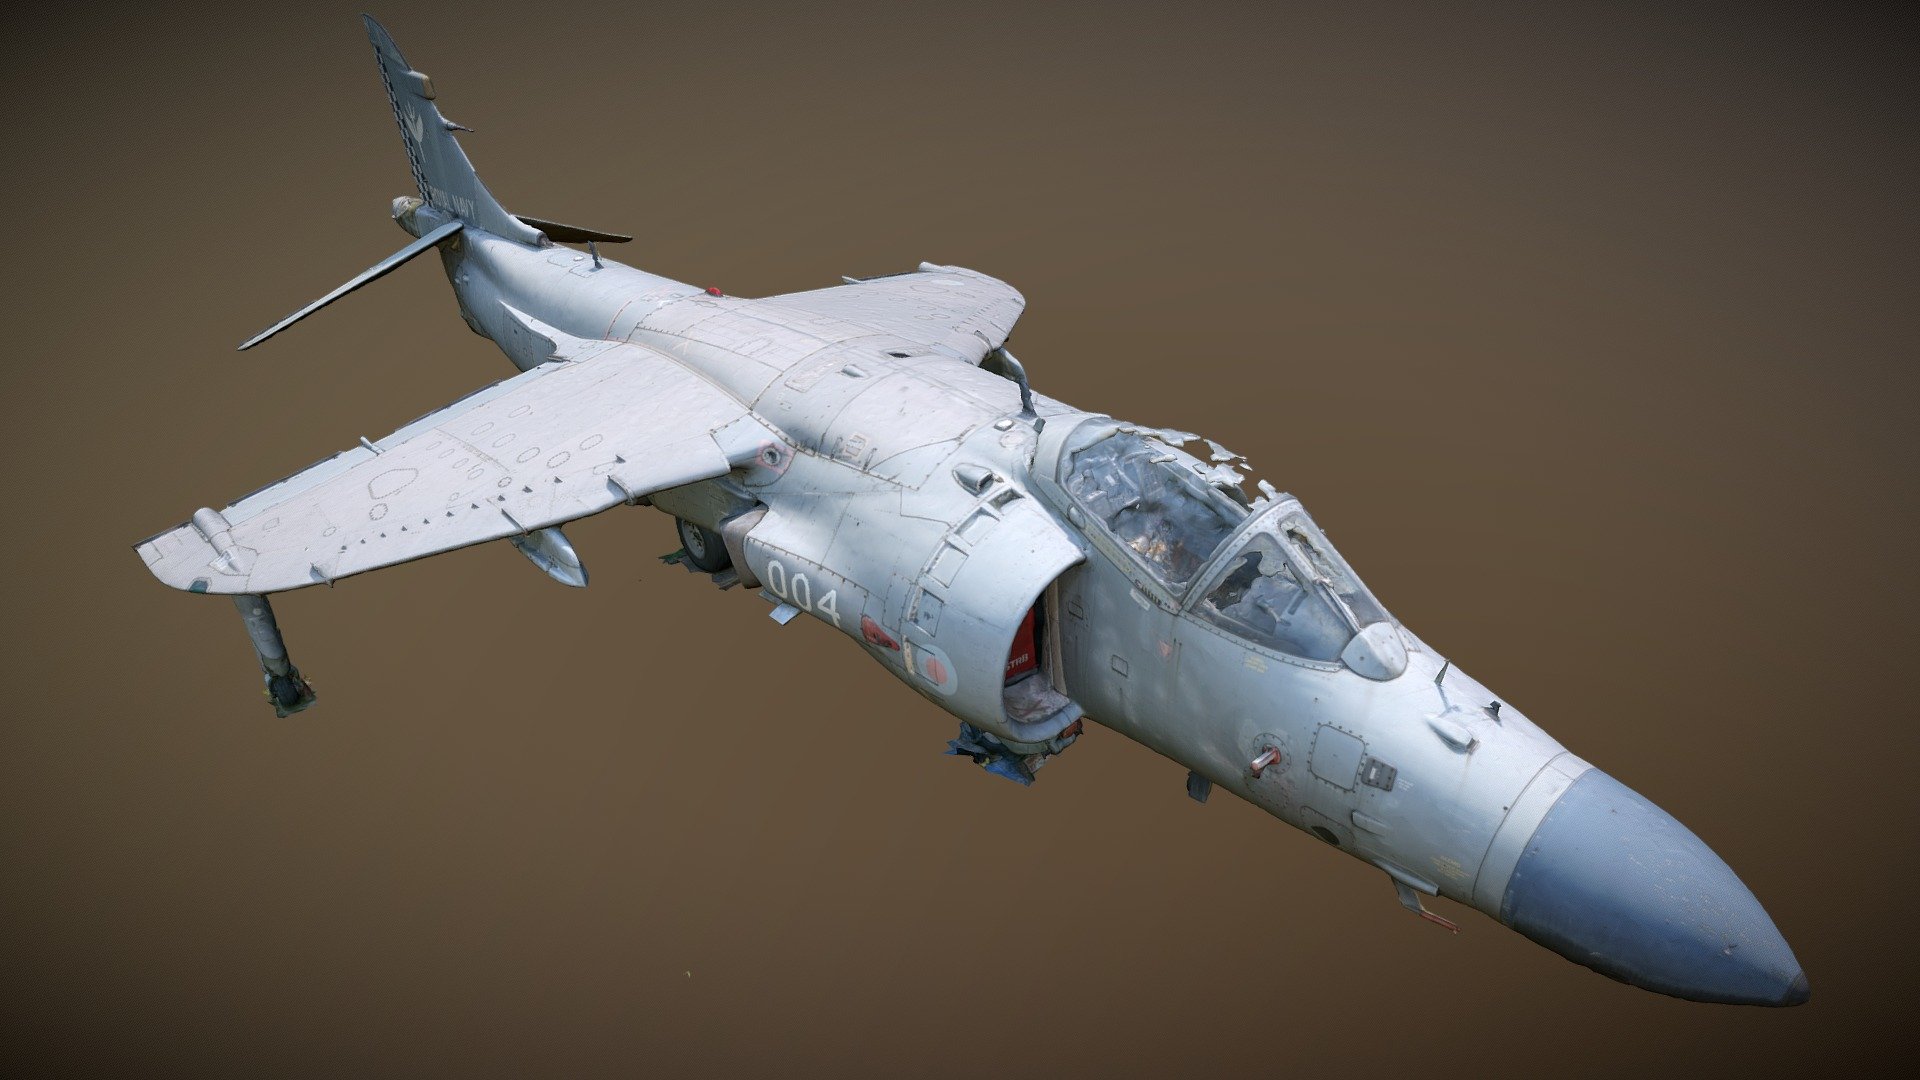 Photogrammetry Scan.

The British Aerospace Sea Harrier is a naval short take-off and vertical landing/vertical take-off and landing jet fighter, reconnaissance and attack aircraft. It is the second member of the Harrier family developed. It first entered service with the Royal Navy in April 1980 as the Sea Harrier FRS1 and became informally known as the &ldquo;Shar